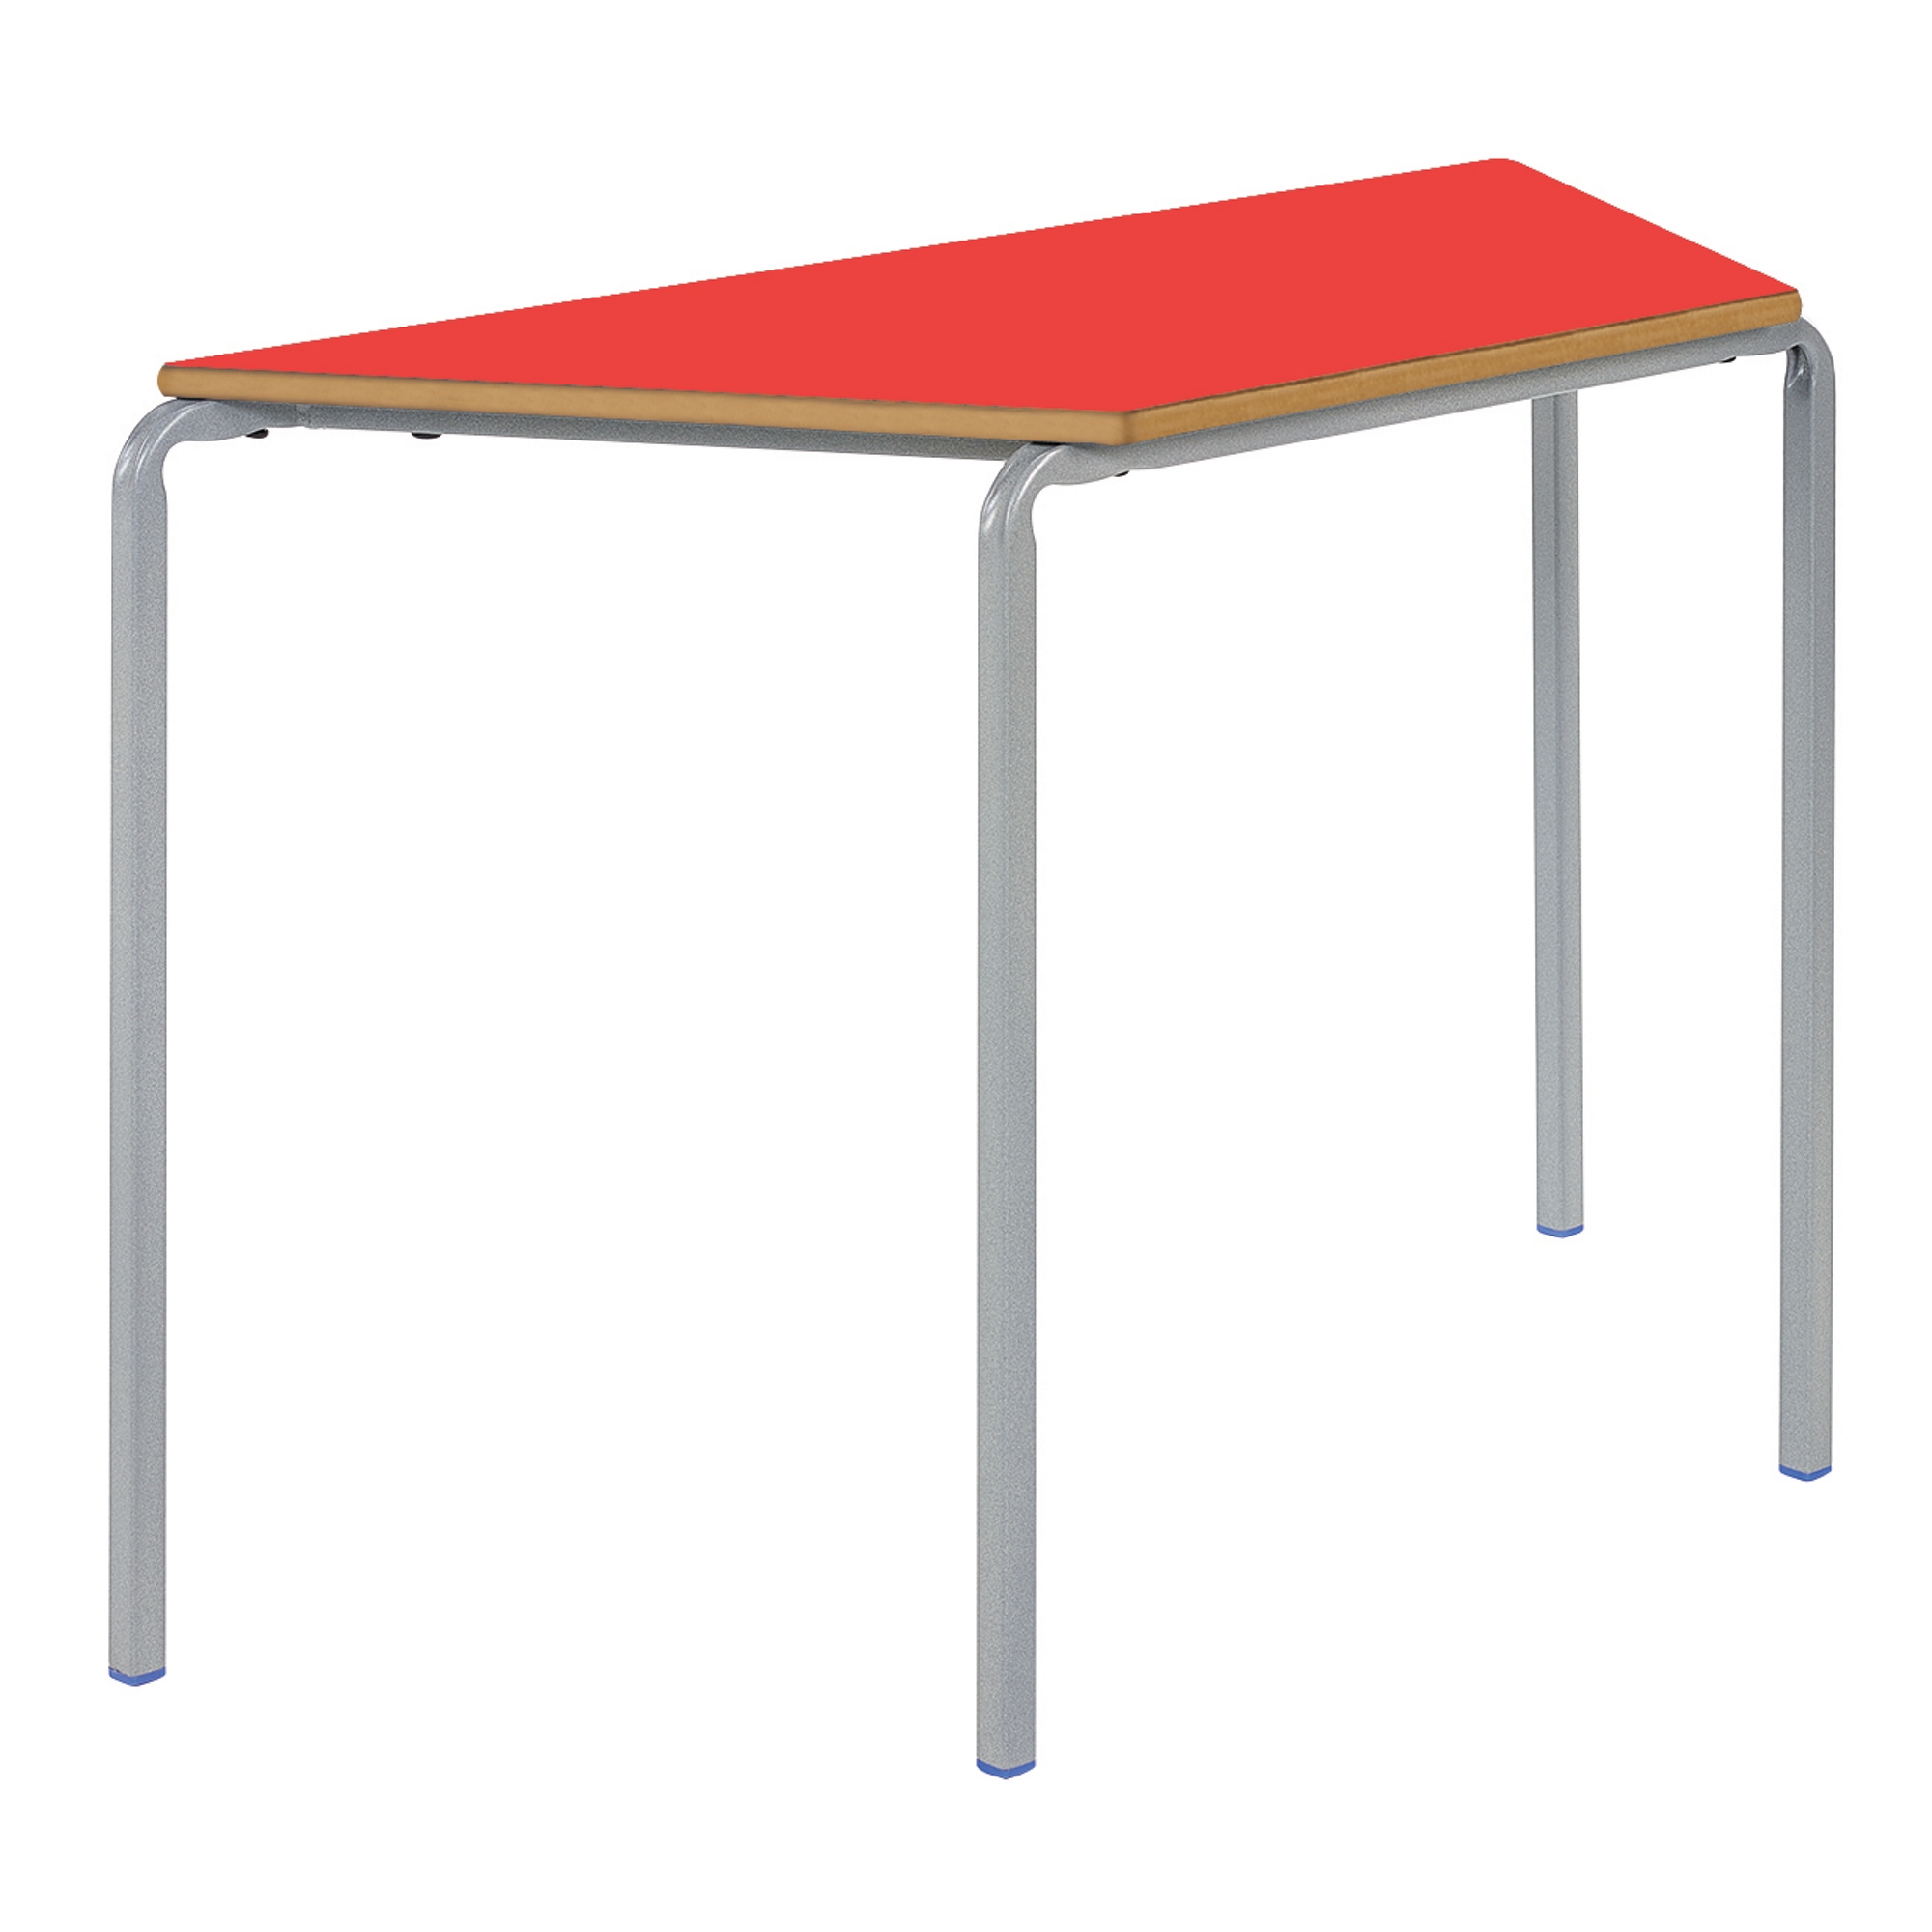 Classmates Trapezoidal Crushed Bent Classroom Table - 1100 x 550 x 710mm - Red